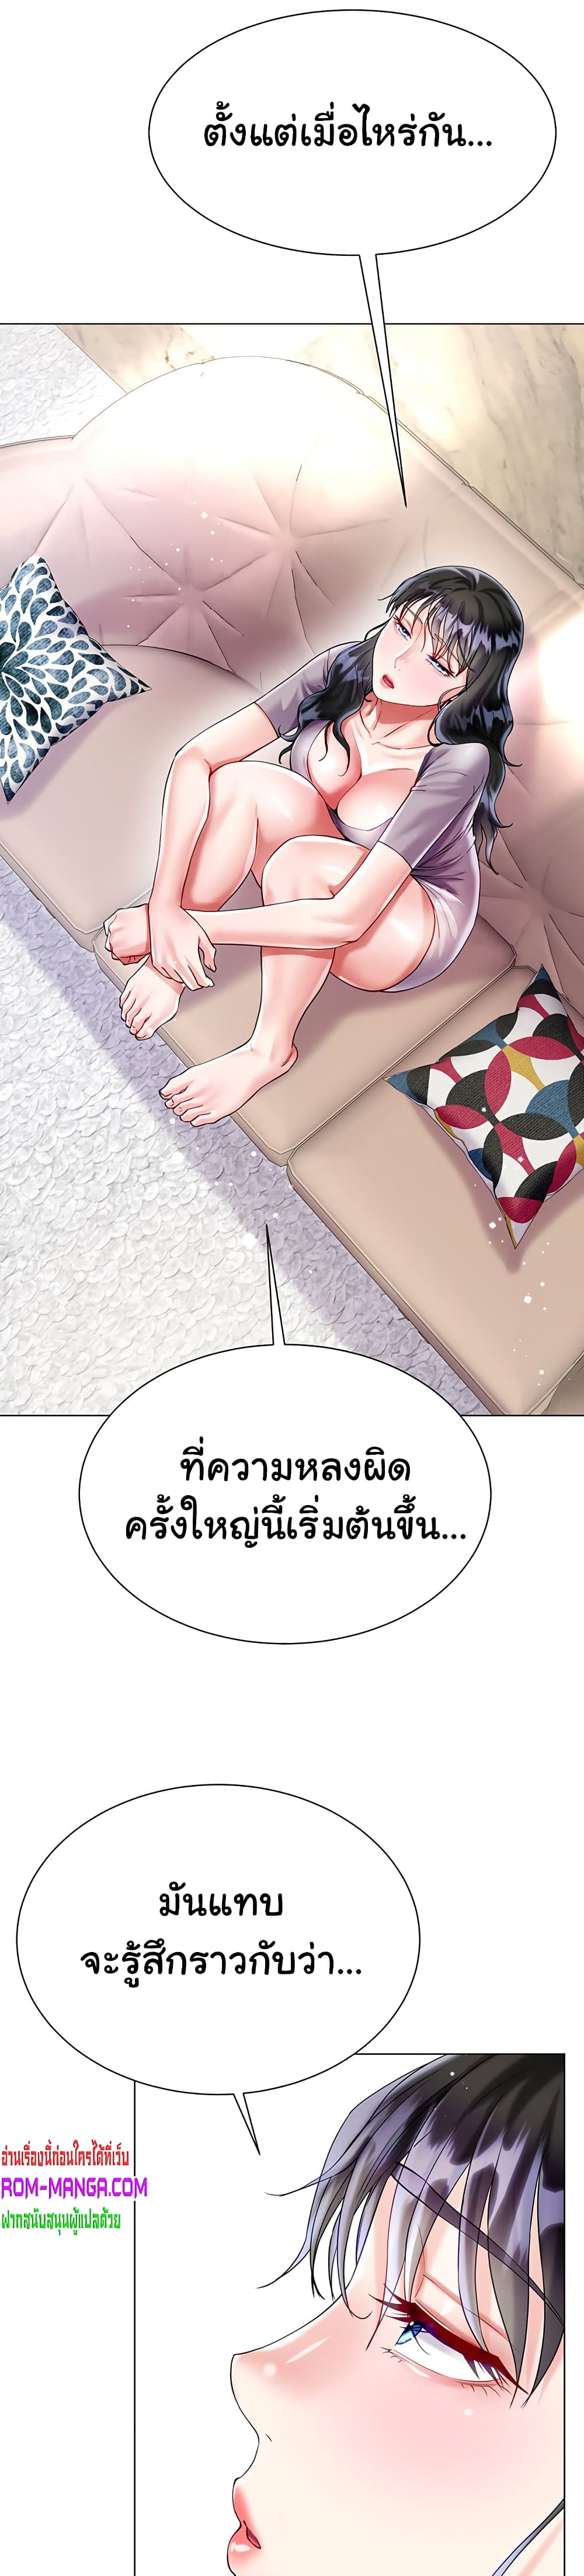 My Sister-in-law’s Skirt 23 ภาพที่ 25